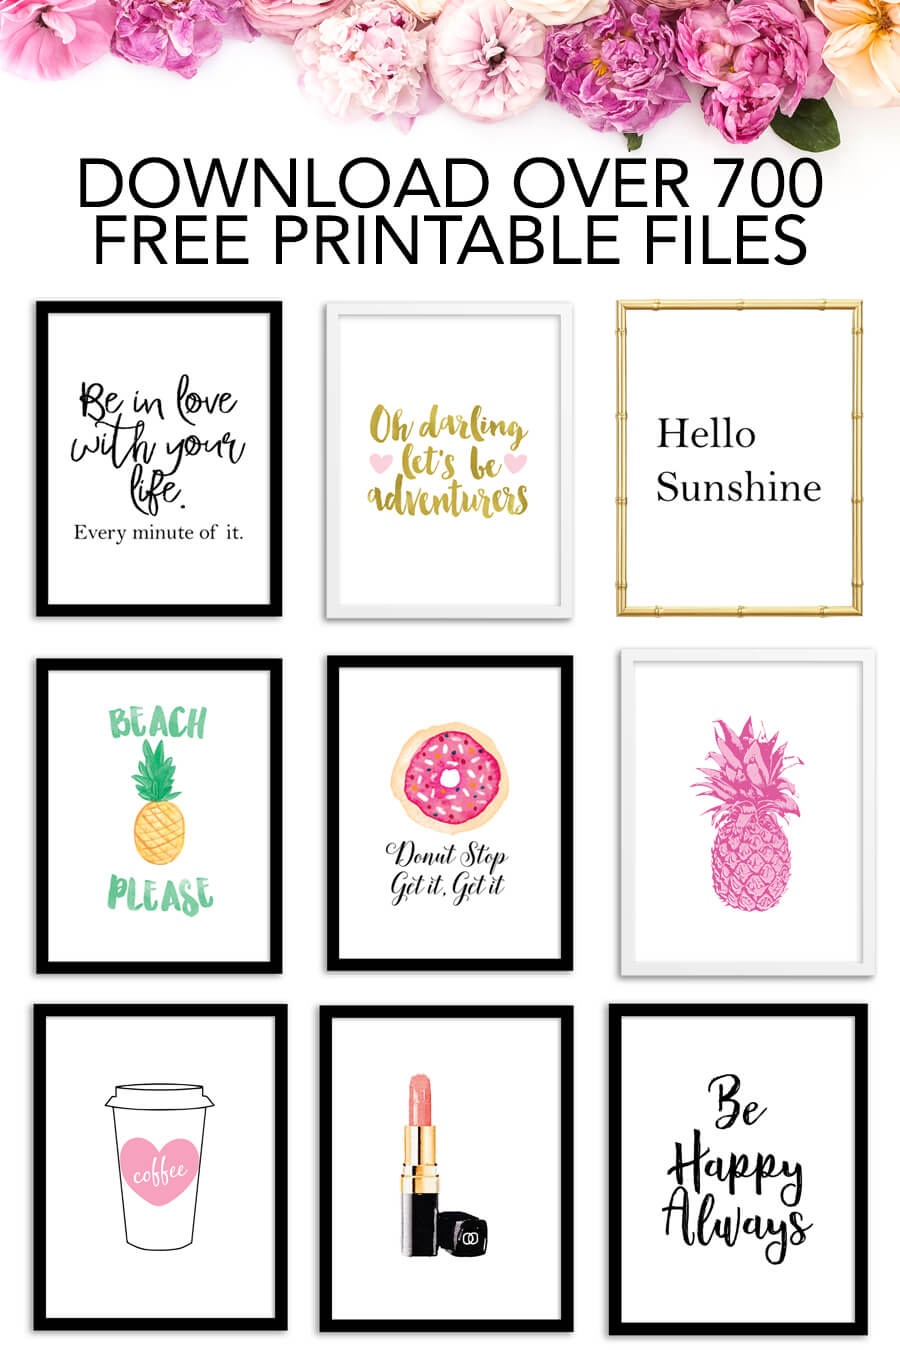 Free Printables - Download Over 700 Free Printable Files! - Chicfetti - Free Printable Images